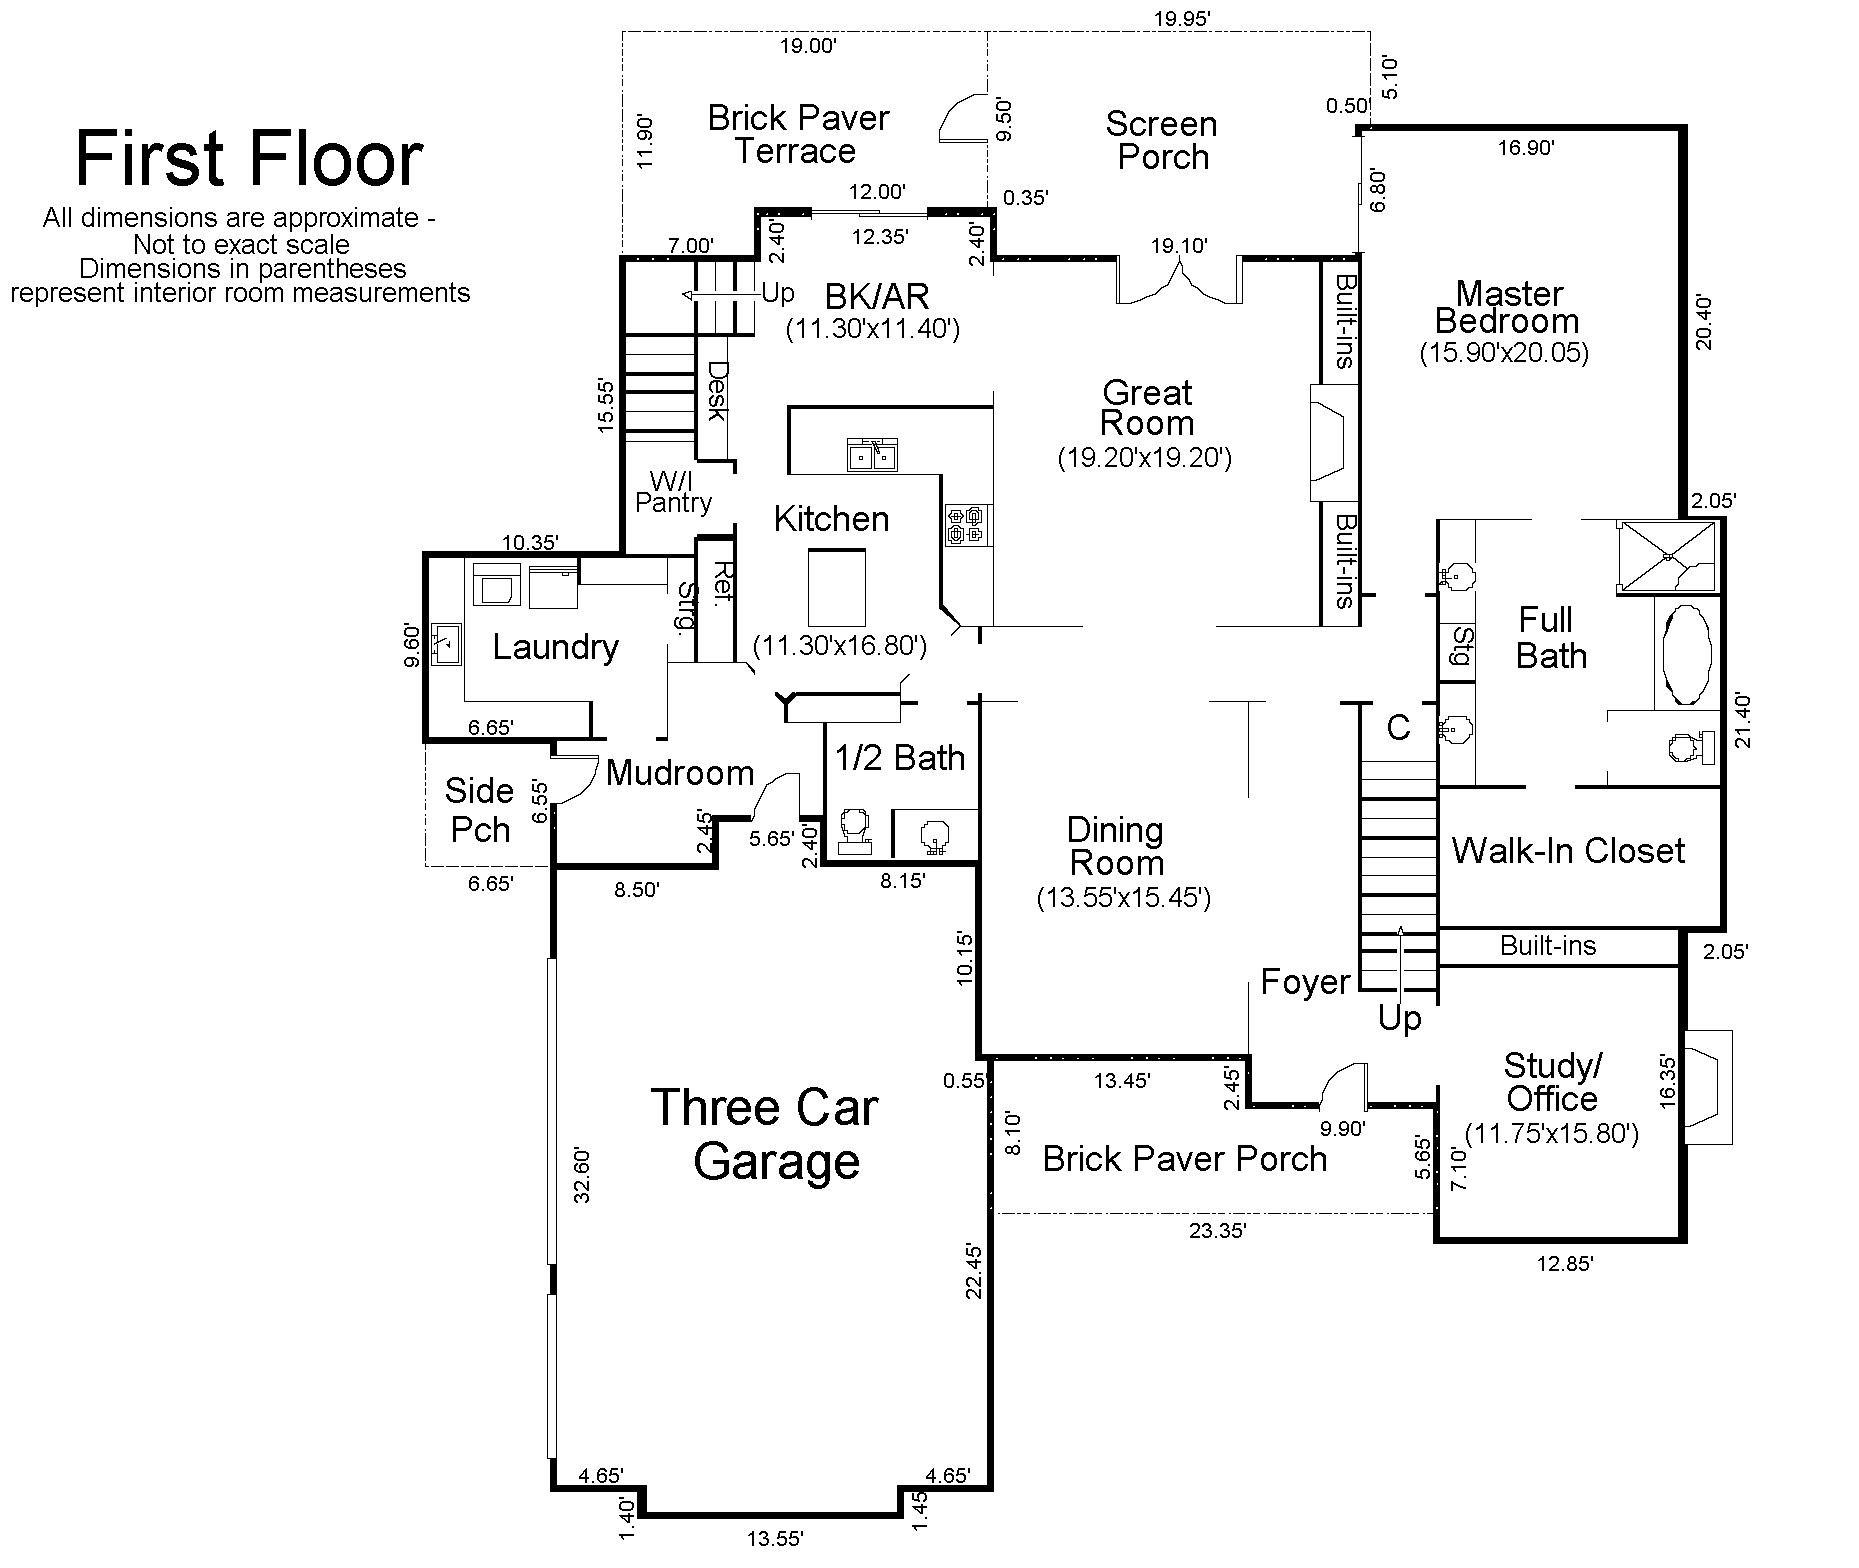 Click here to see a larger picture of this sample floorplan